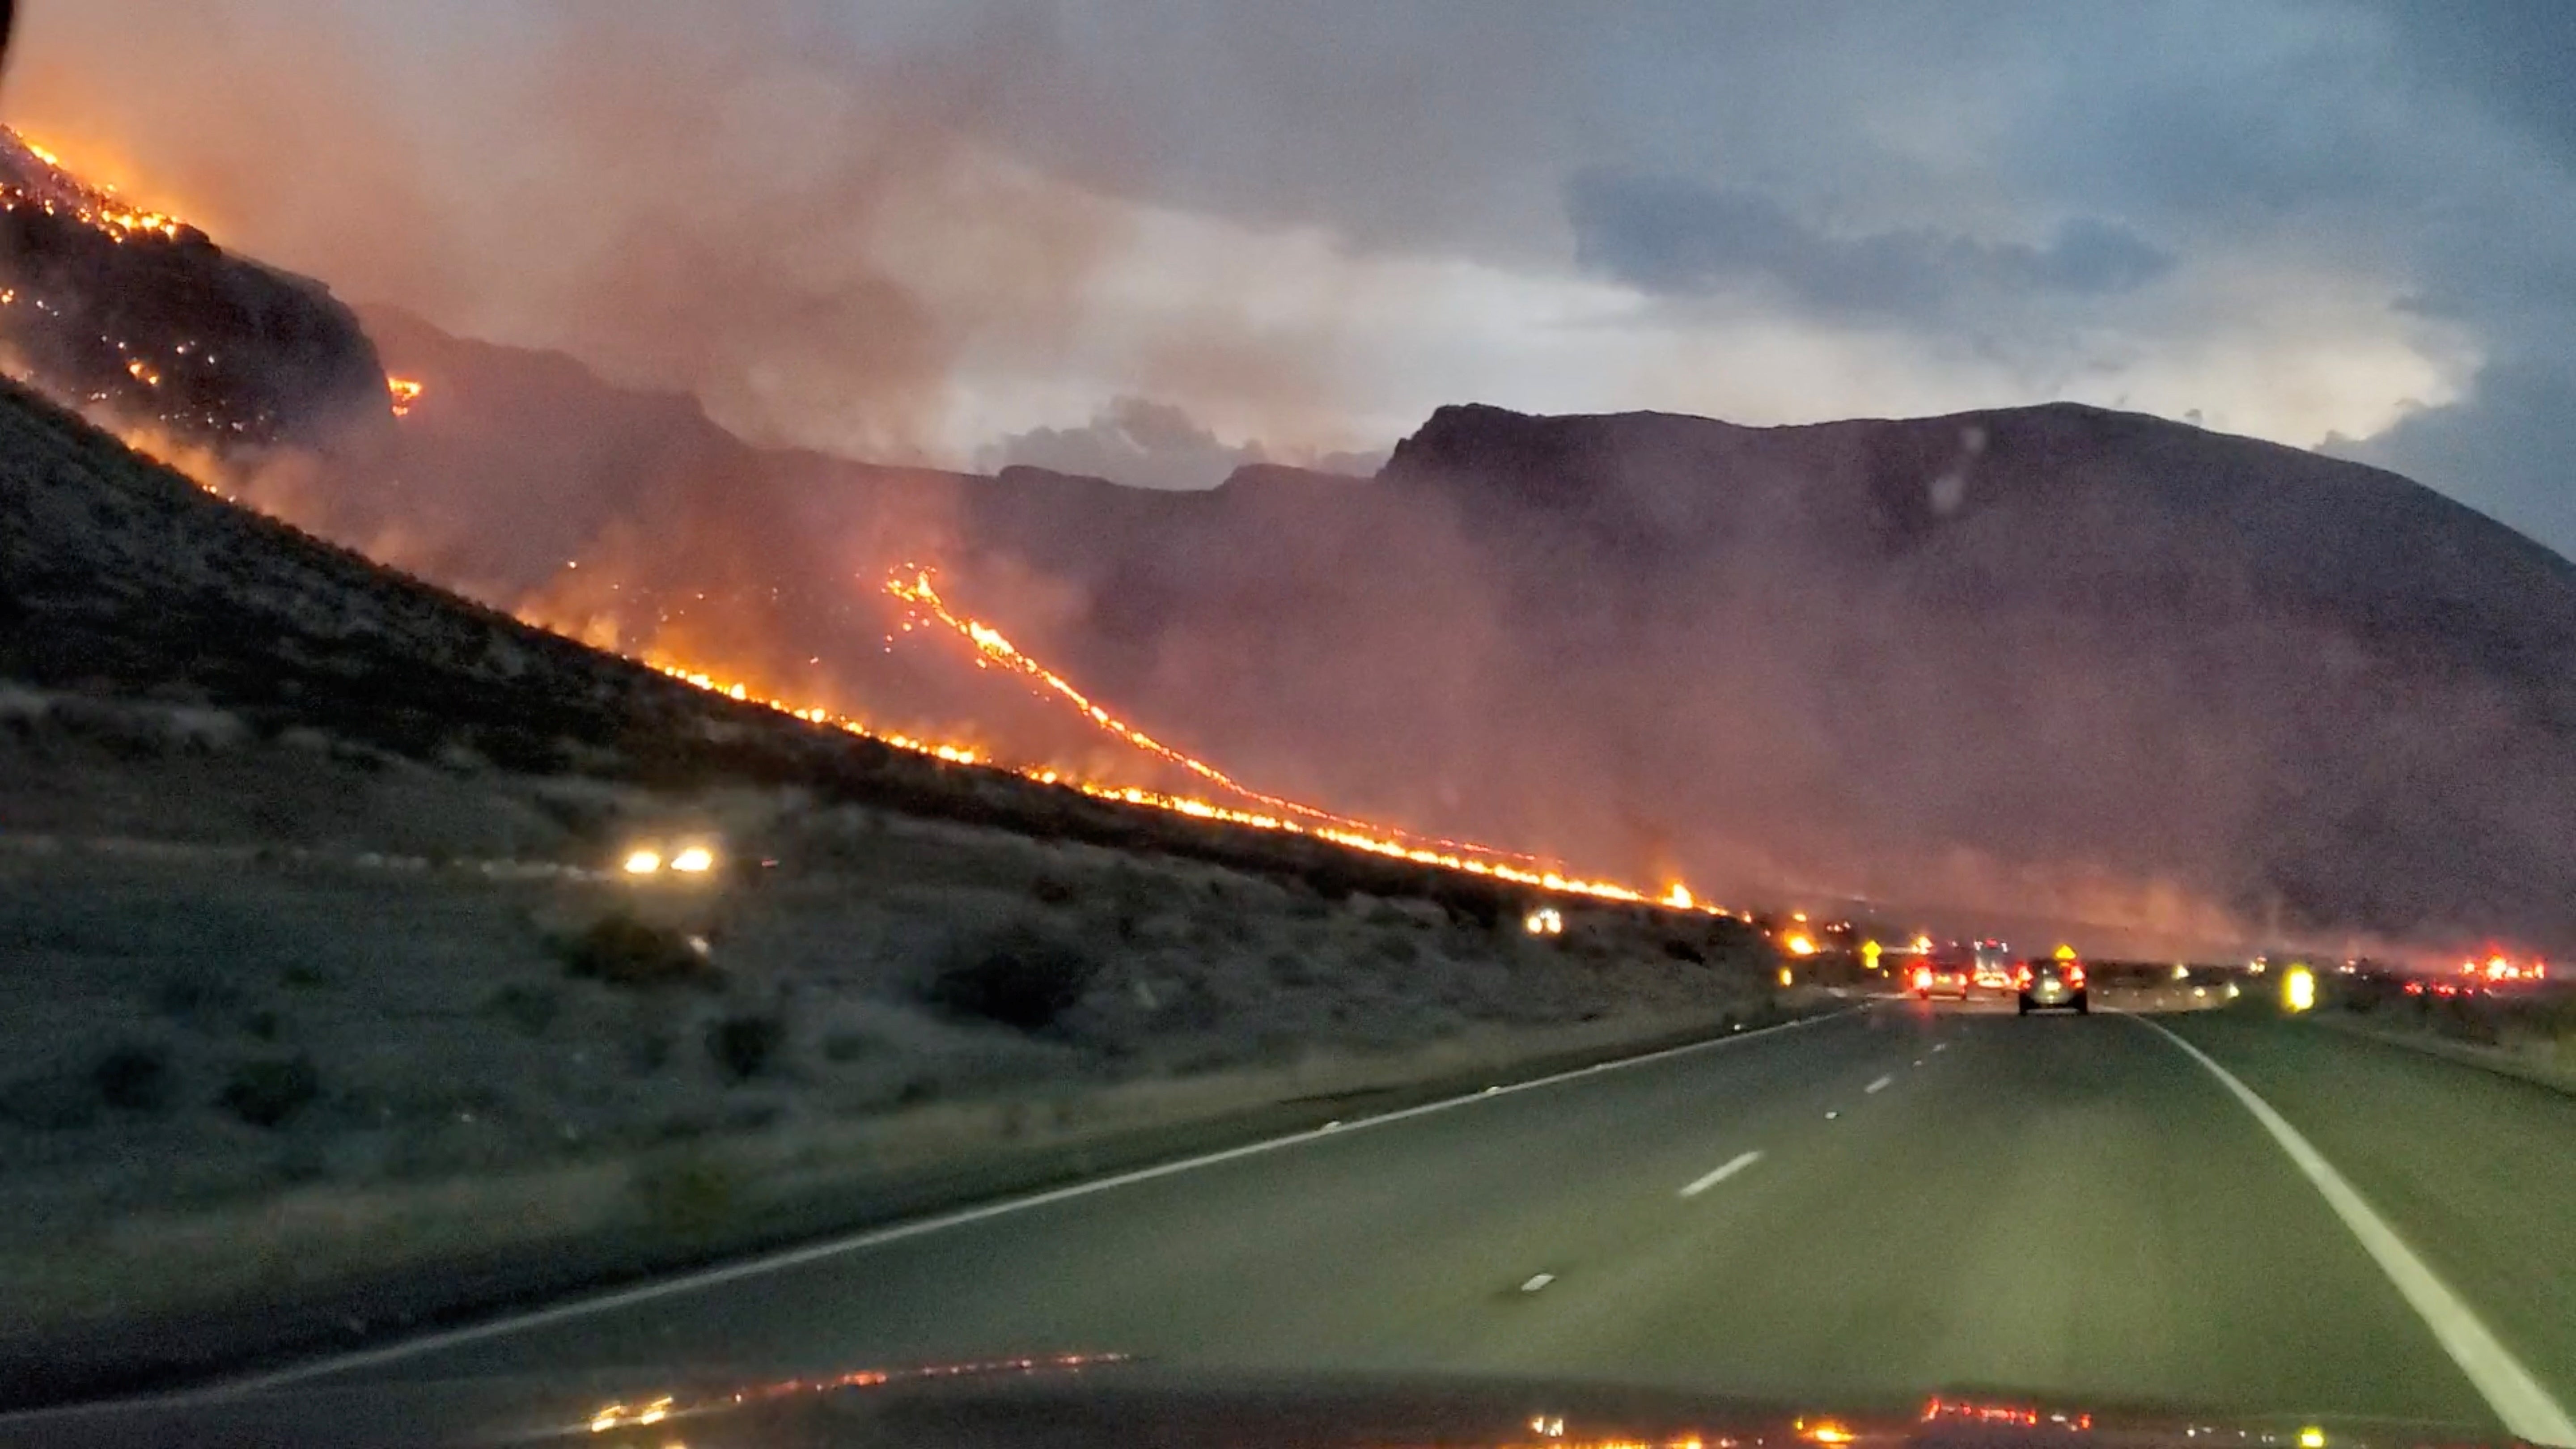 Flames are seen on side of the highway after a bushfire broke out, near St. George, Arizona on 12 July 2021, in this still image obtained from a social media video